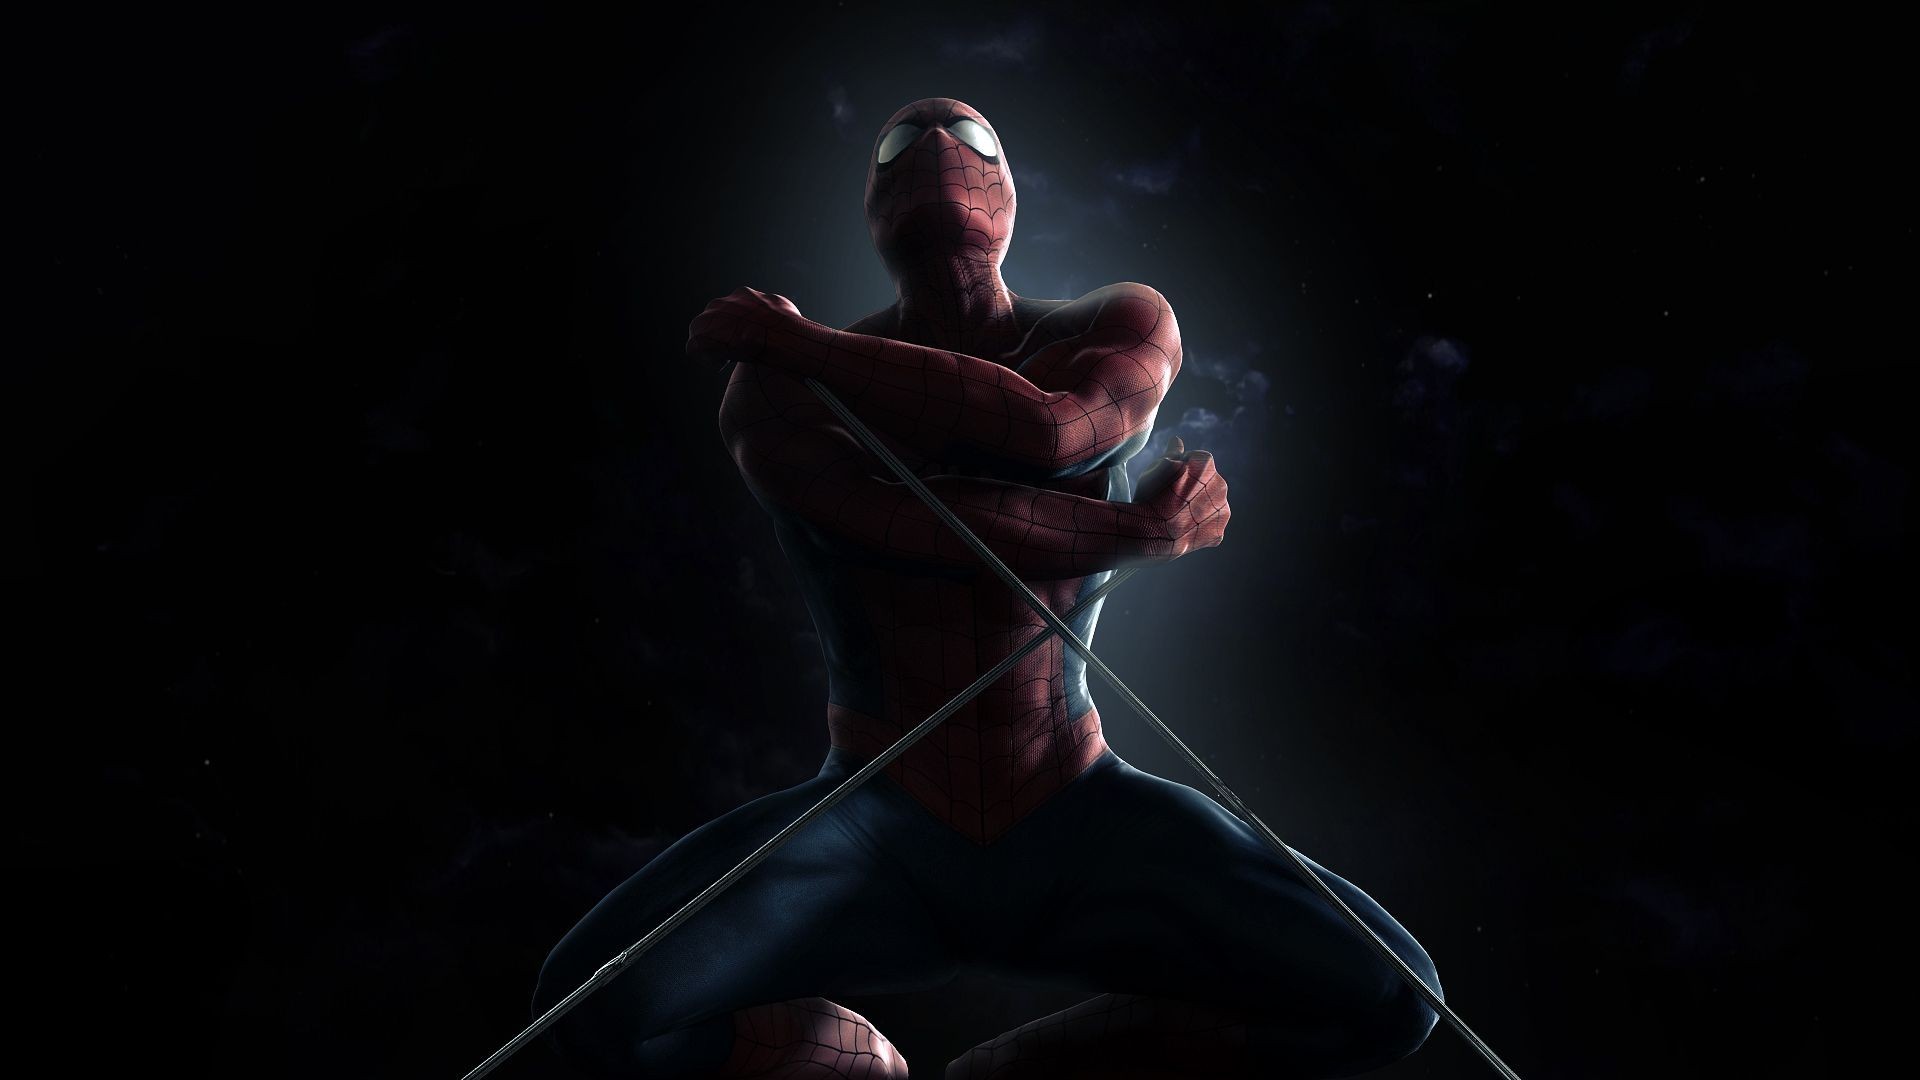 Spiderman wallpaper HD ·① Download free HD wallpapers for desktop and